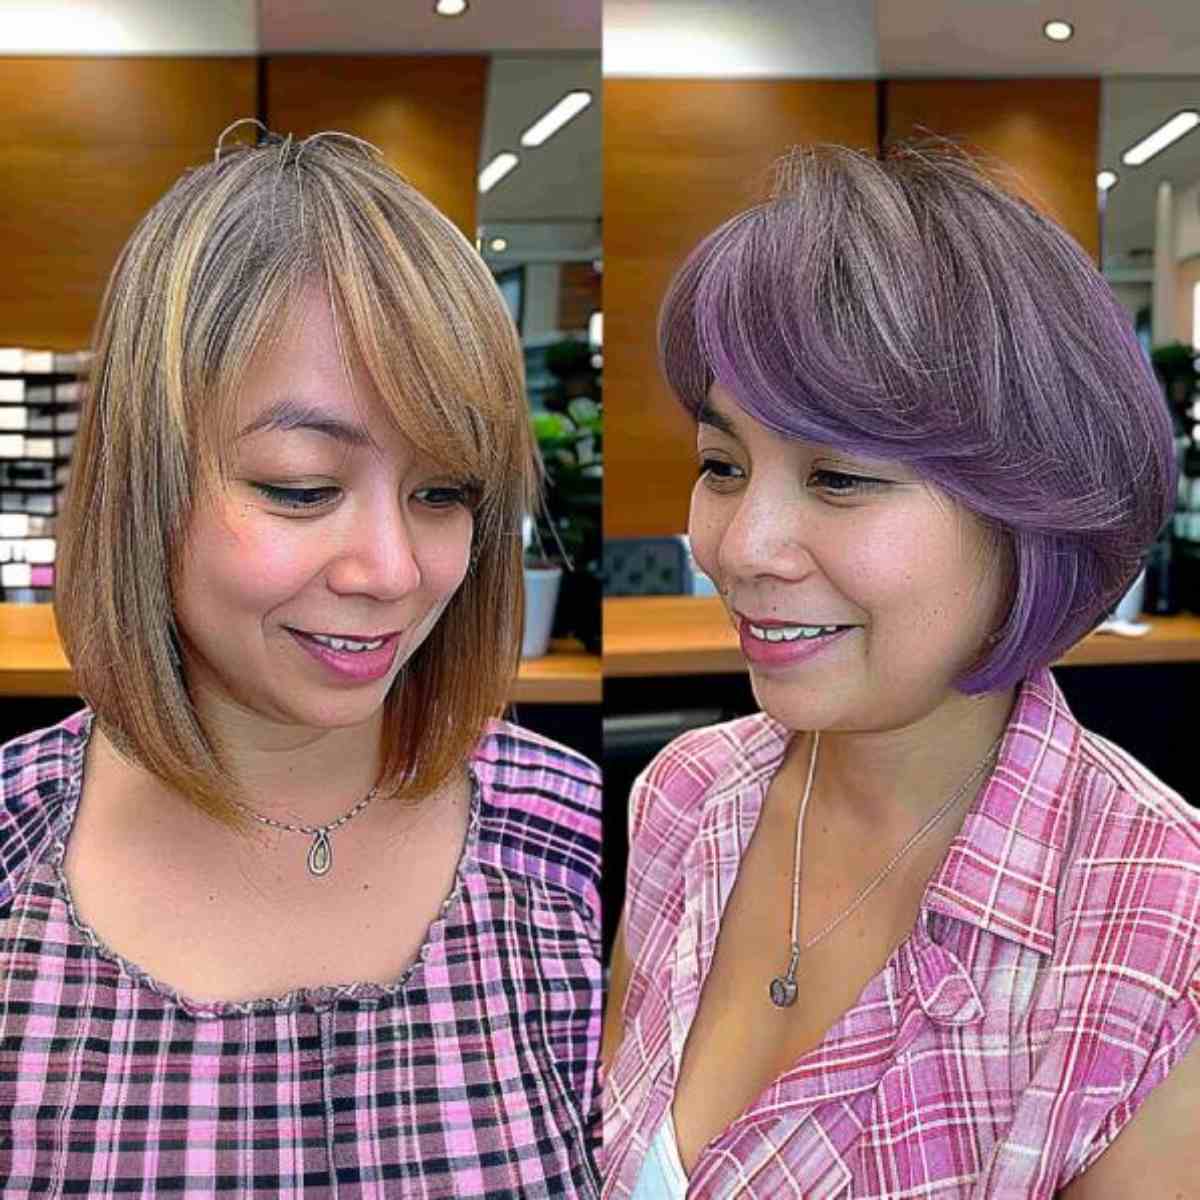 Medium caramel bob transformed to a vibrant purple chin-length layered bob, suited for oval face shapes.